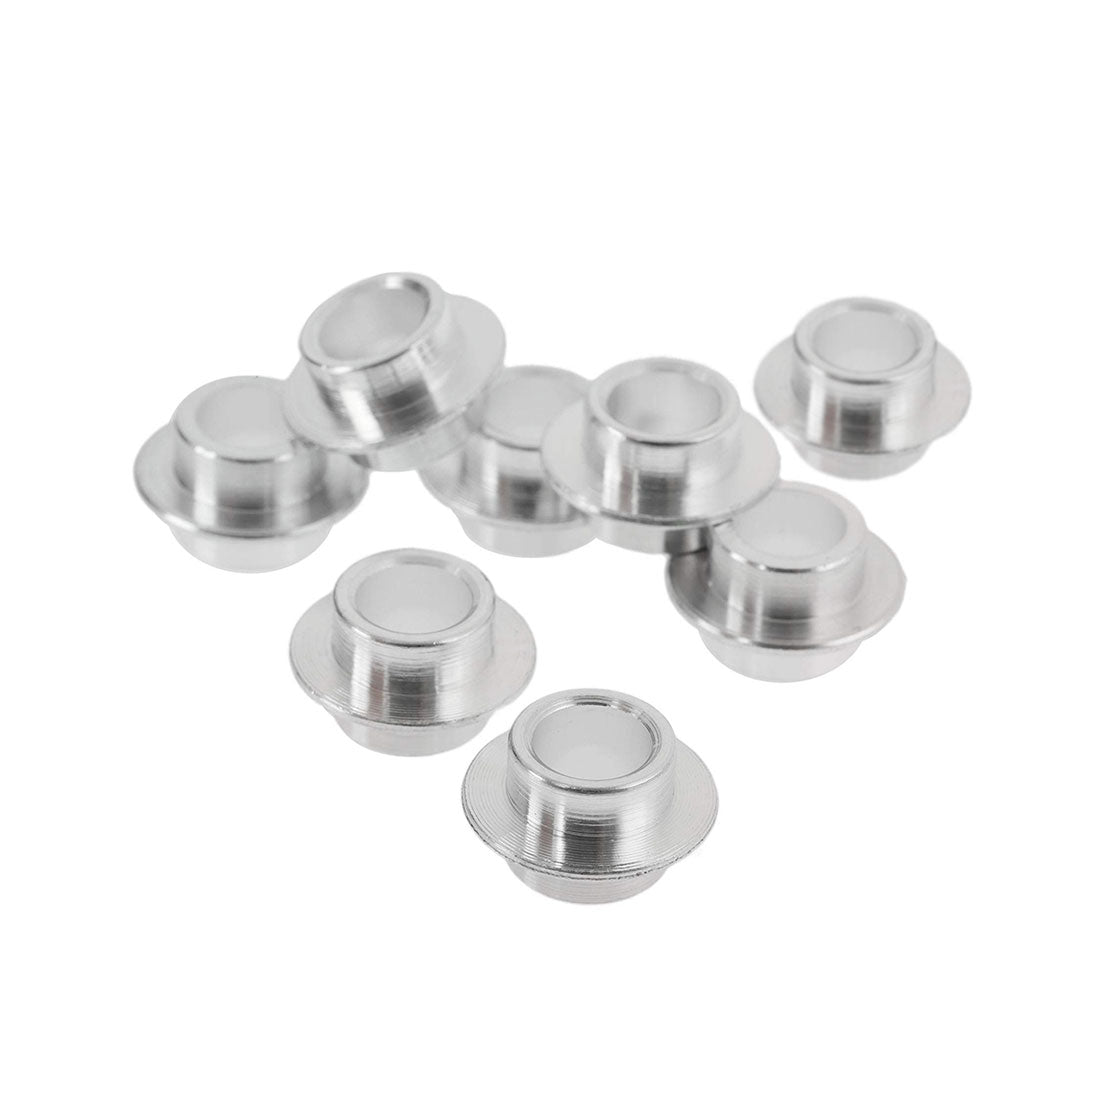 Aluminum 8mm Bearing Spacers - 8pk Roller Skate Hardware and Parts